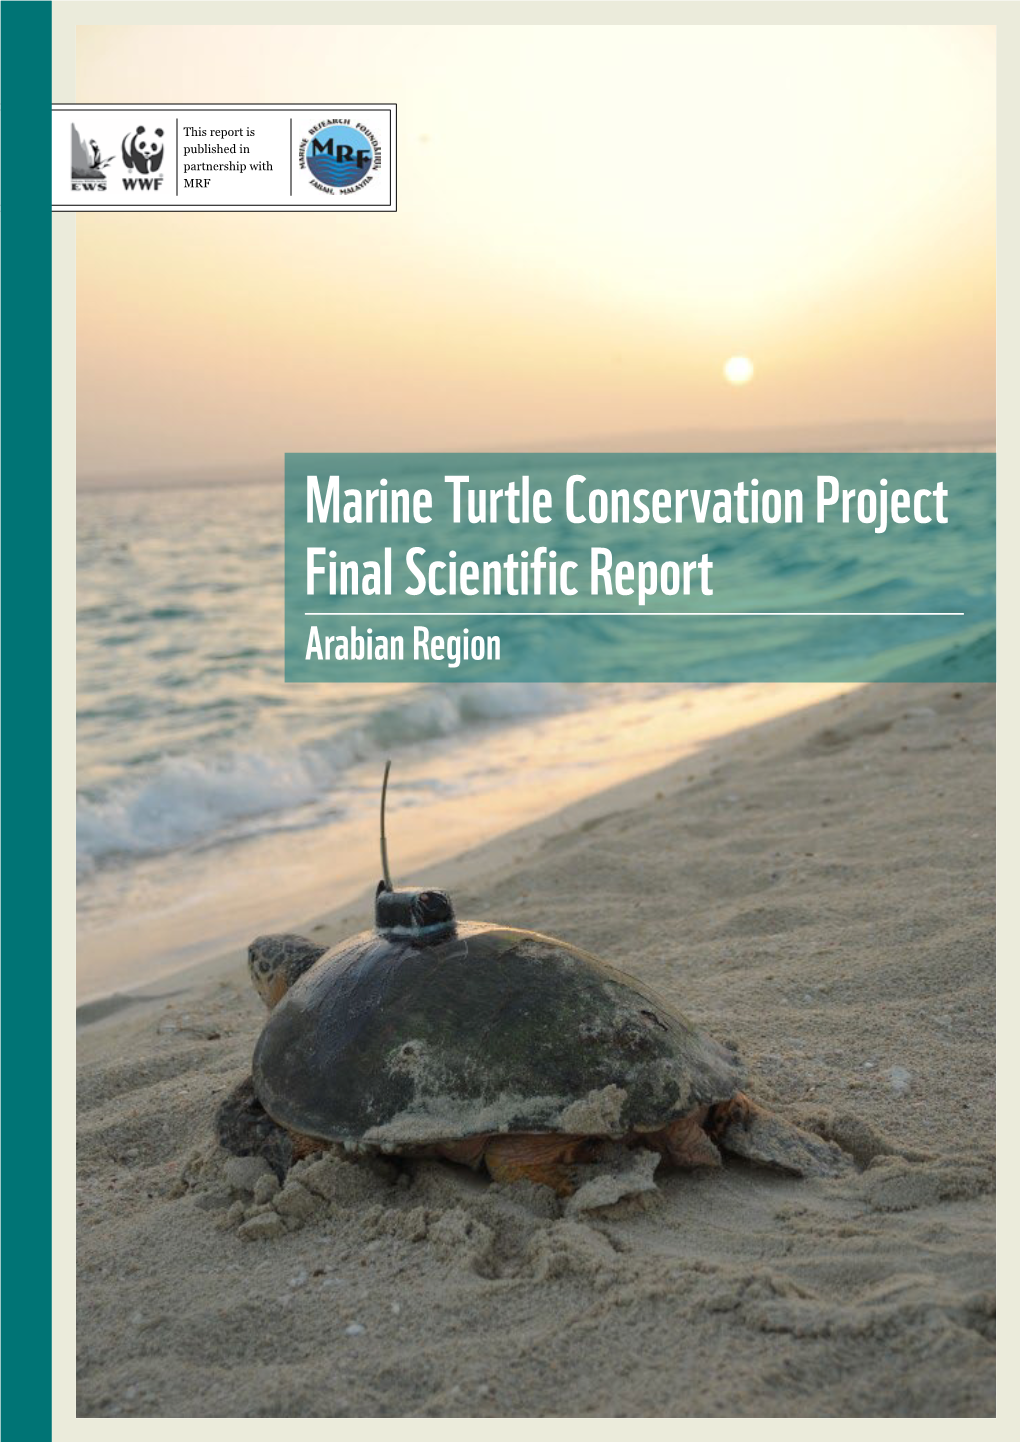 Marine Turtle Conservation Project Final Scientific Report